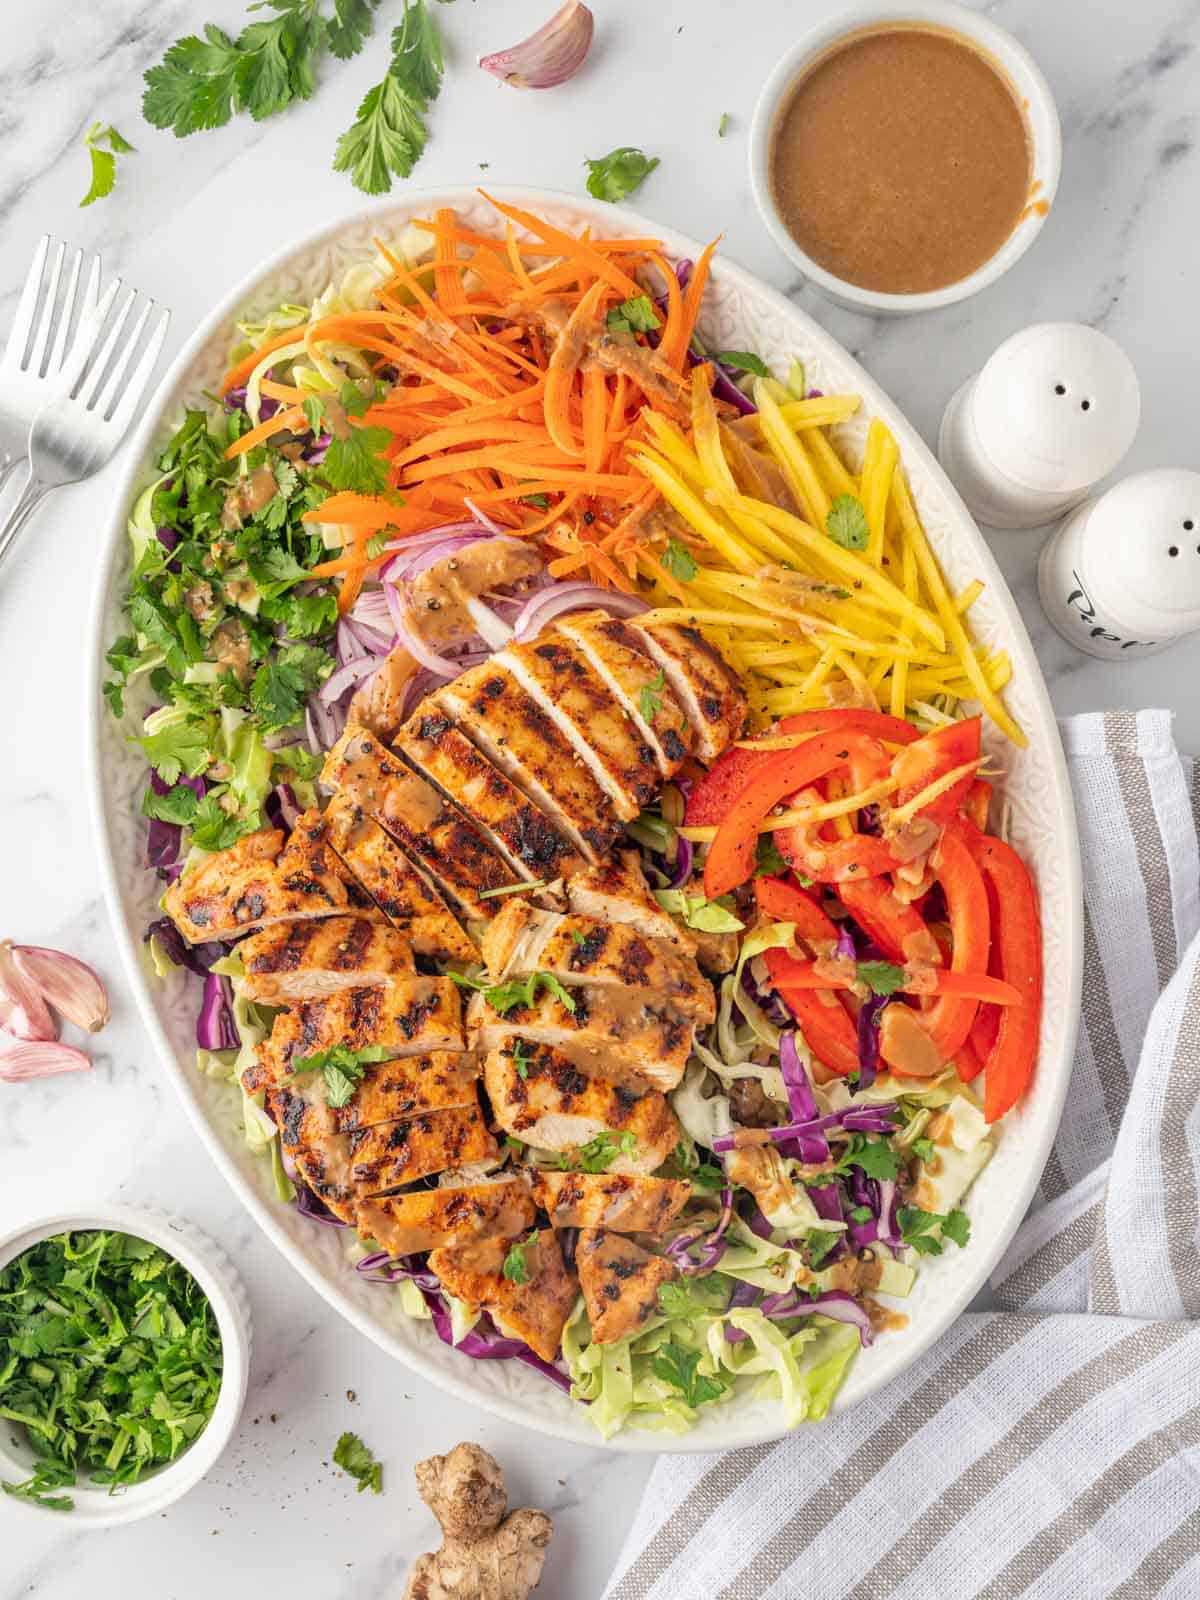 Chicken salad with mango and peanut butter dressing.